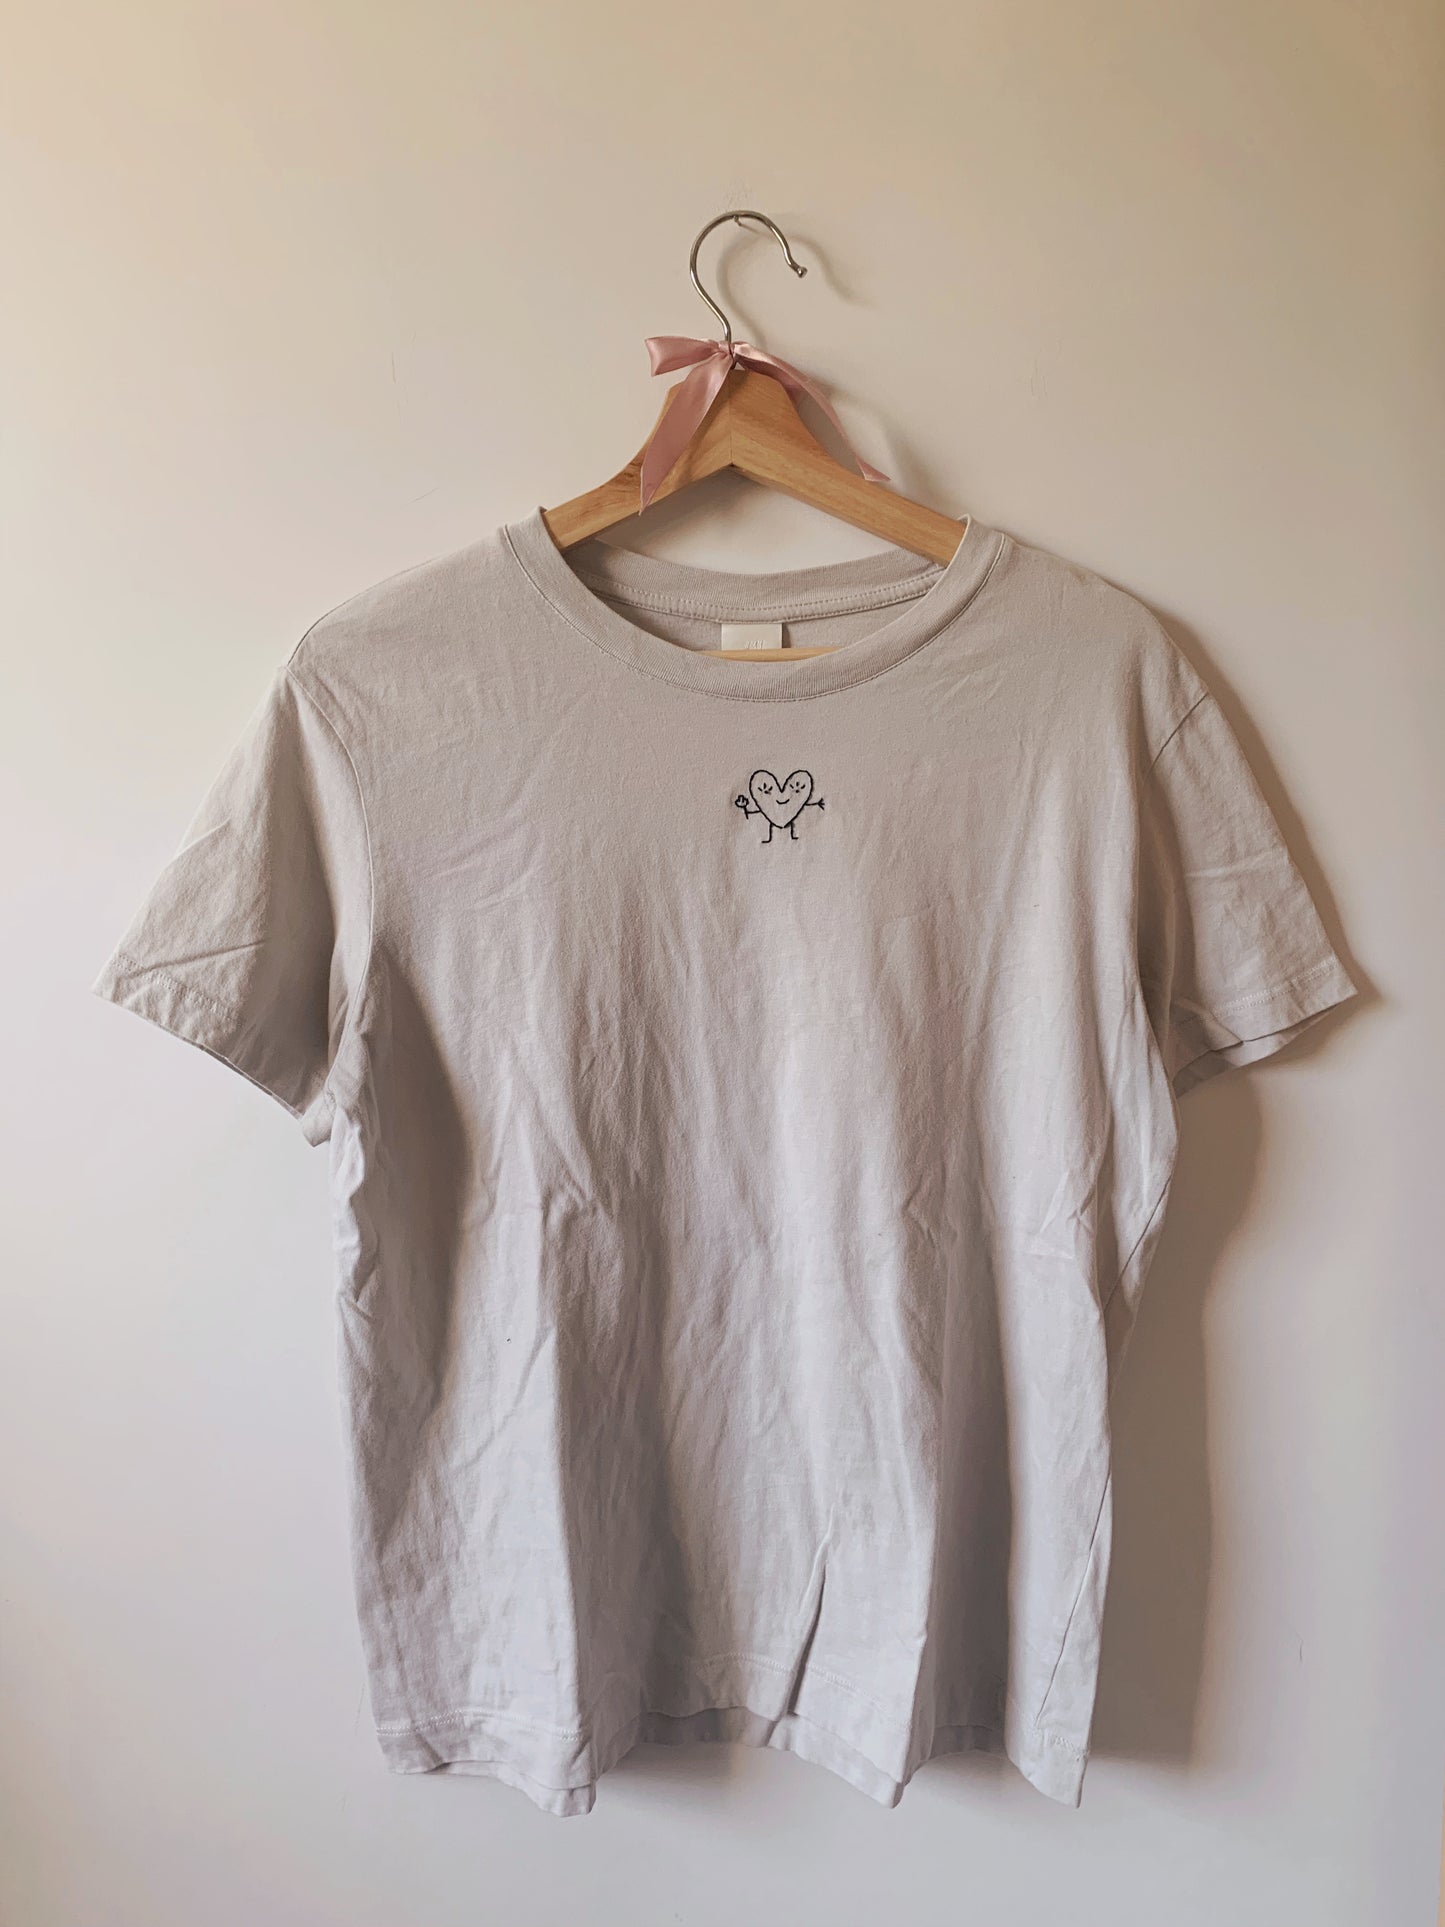 Hearty Boy Upcycled T-Shirt